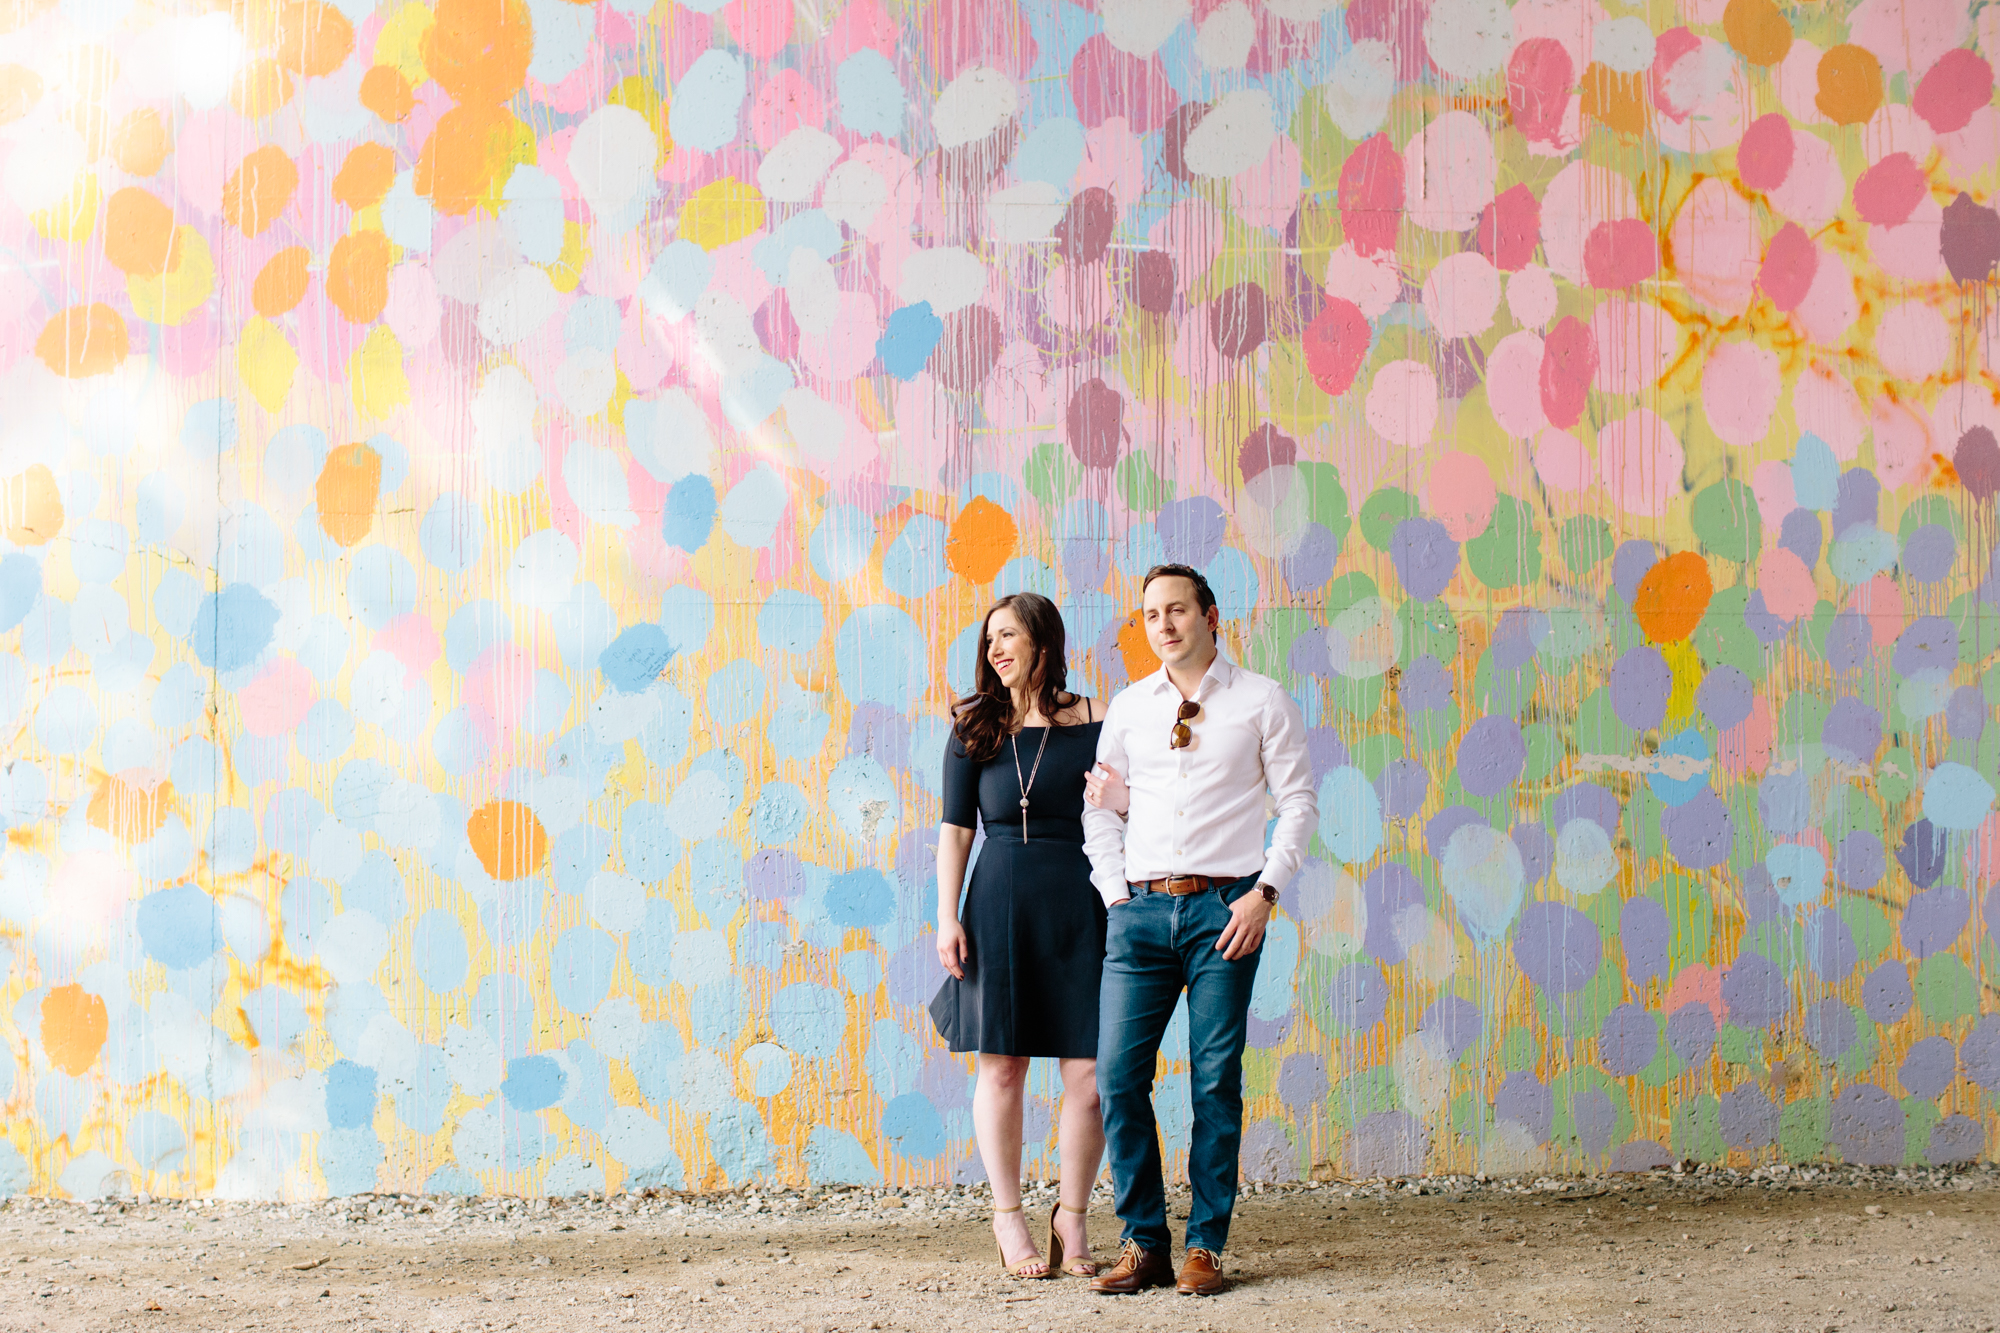 This polka dot mural is only a few steps away from Piedmont park and is such a fun place for photos!